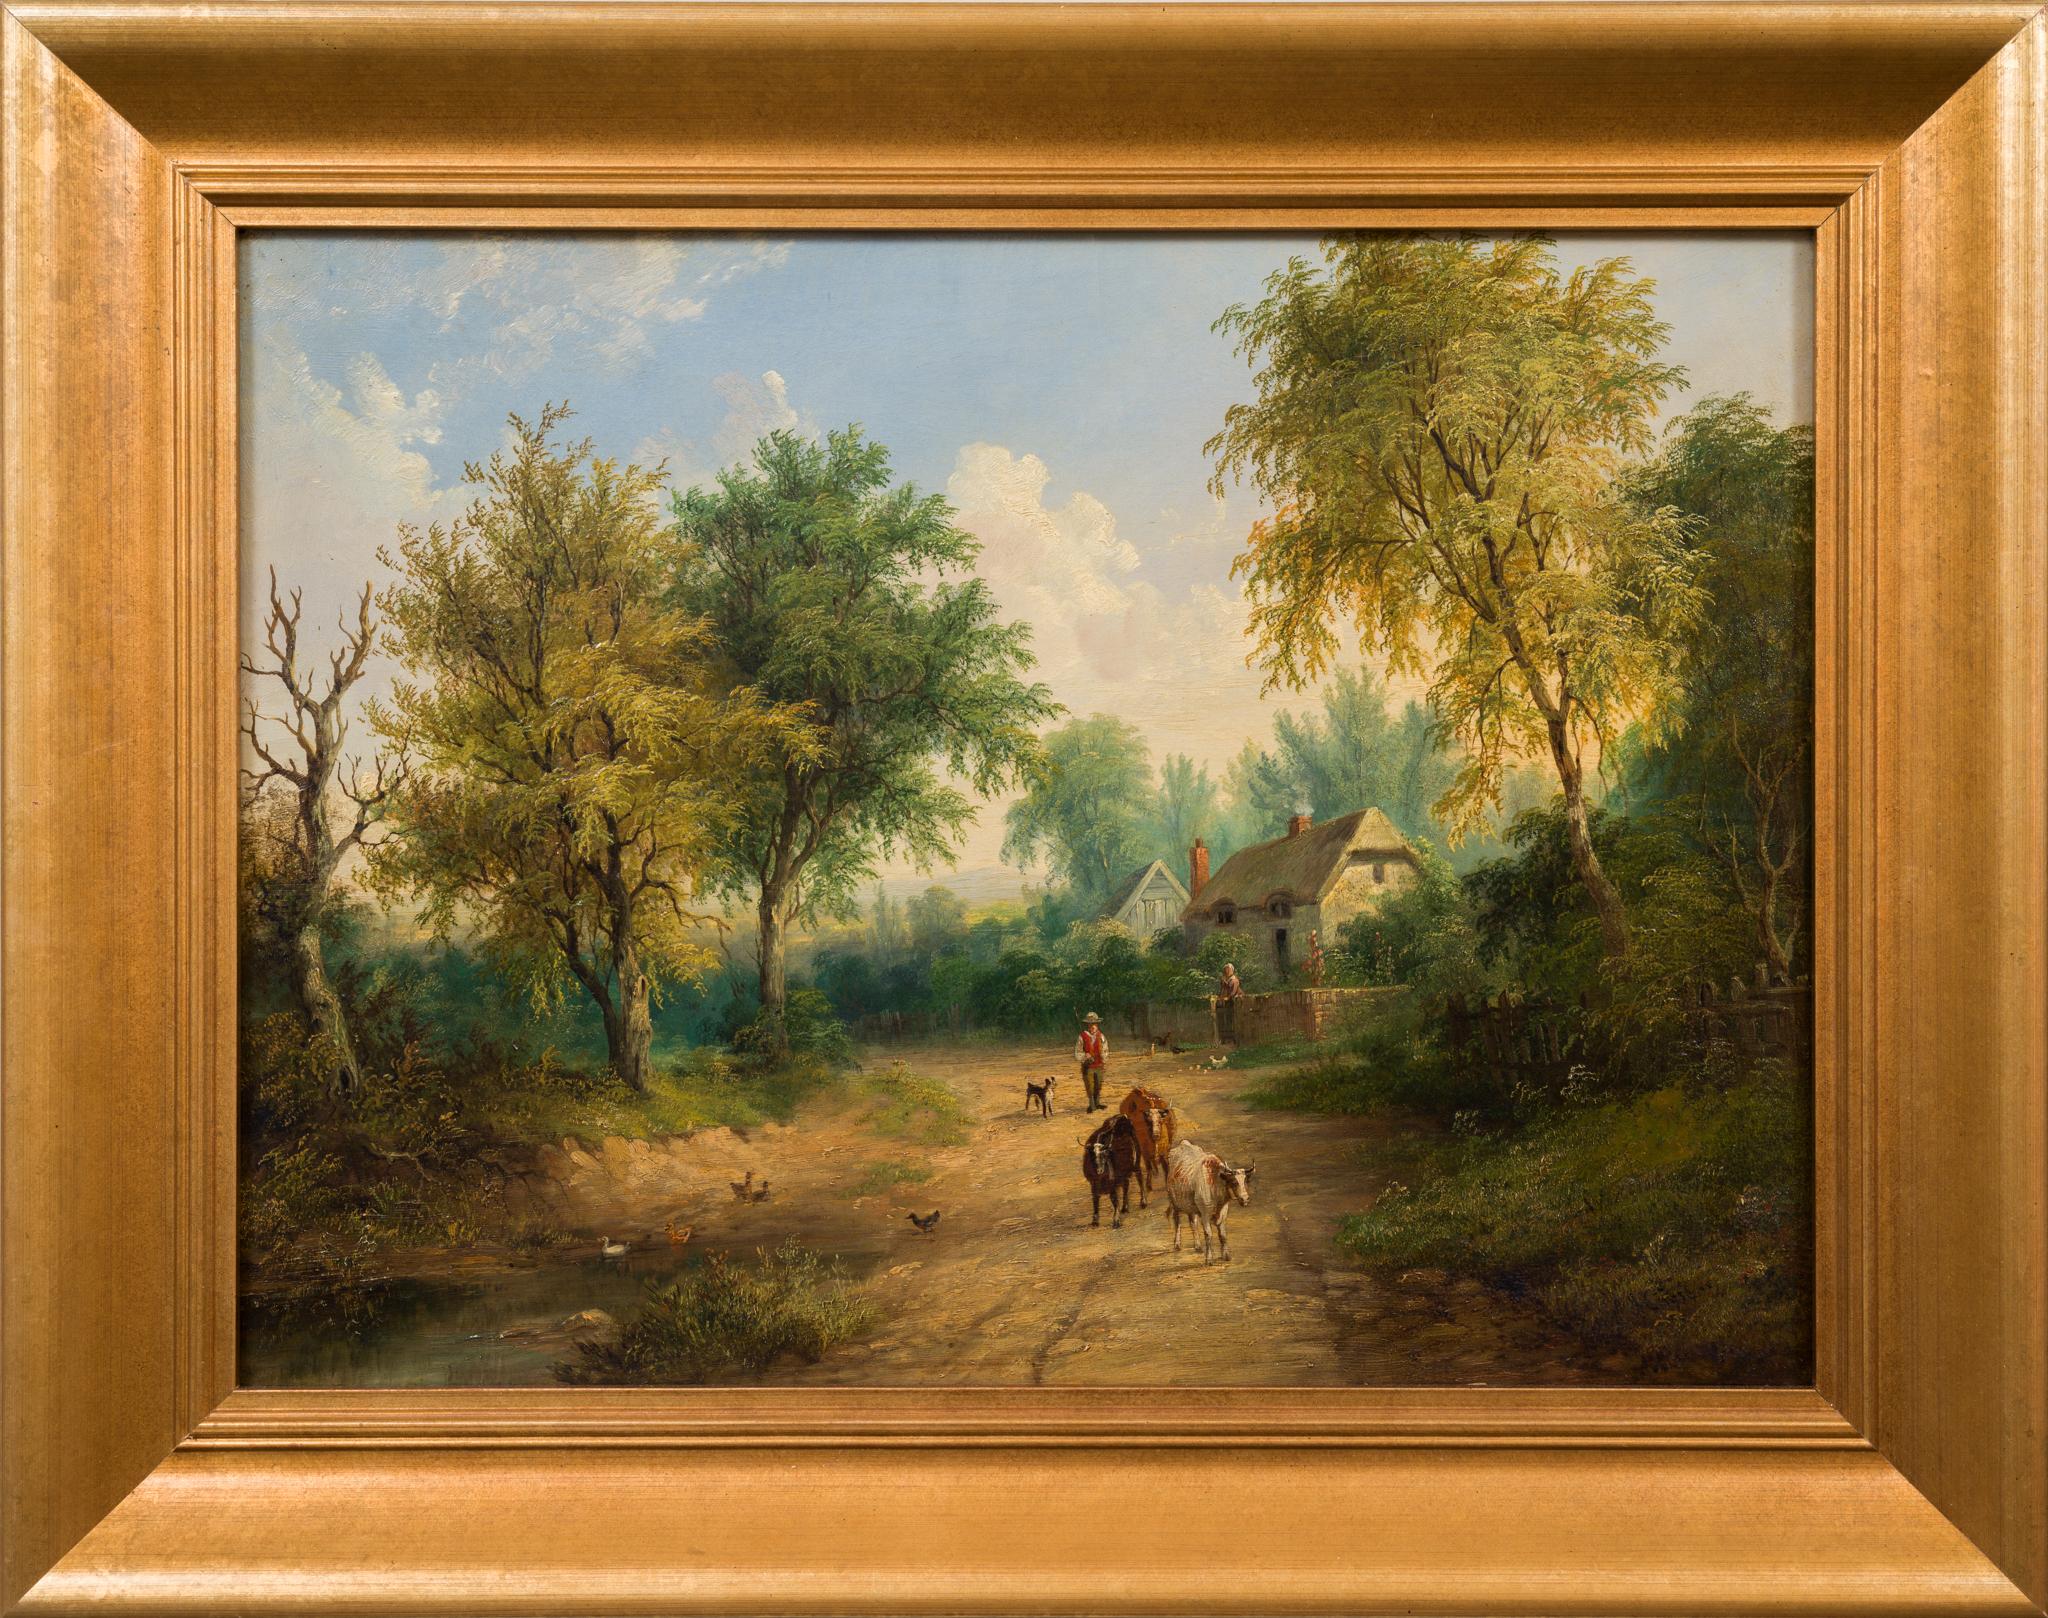 The Daily Tasks of Rural Life, c. 1860, Romanticism Oil Painting. 